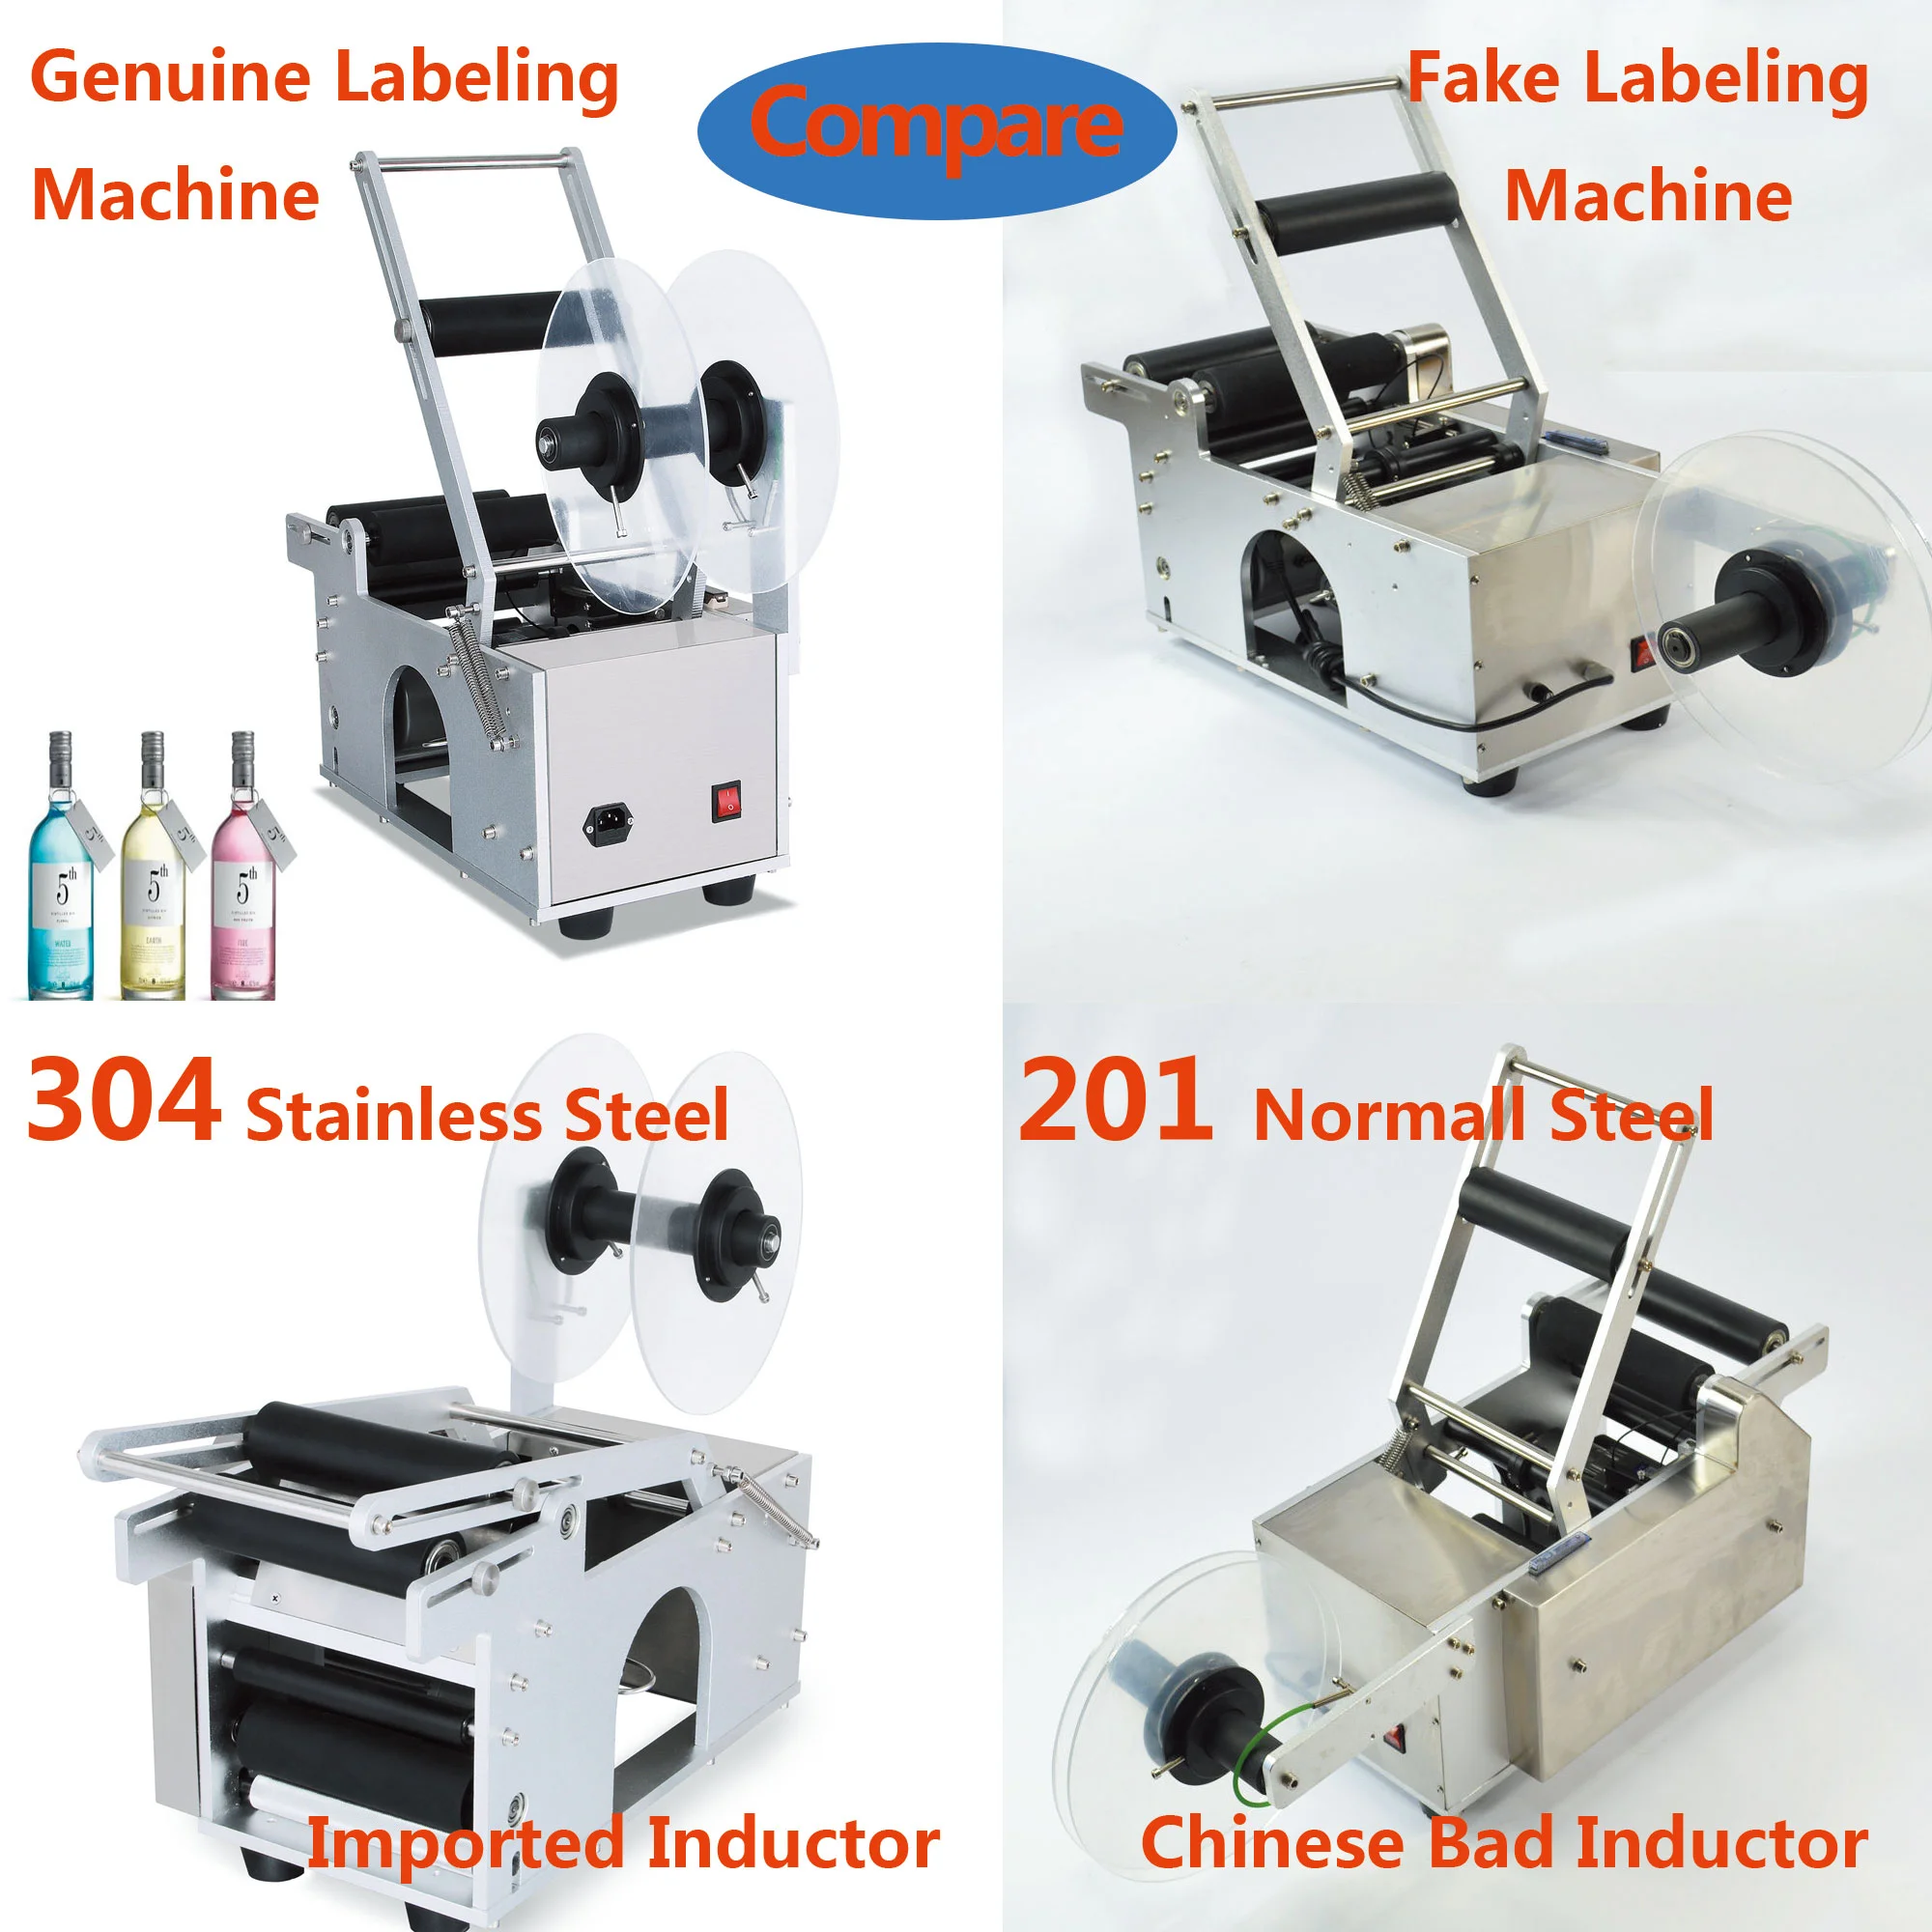 Bottle Label Printing Machine Electrical Mt 50 Semi Automatic Round Bottle Labeling Machine With Code Printed Buy Bottle Label Printing Machine Beer Bottle Label Machines Wine Bottle Labeling Machine Product On Alibaba Com